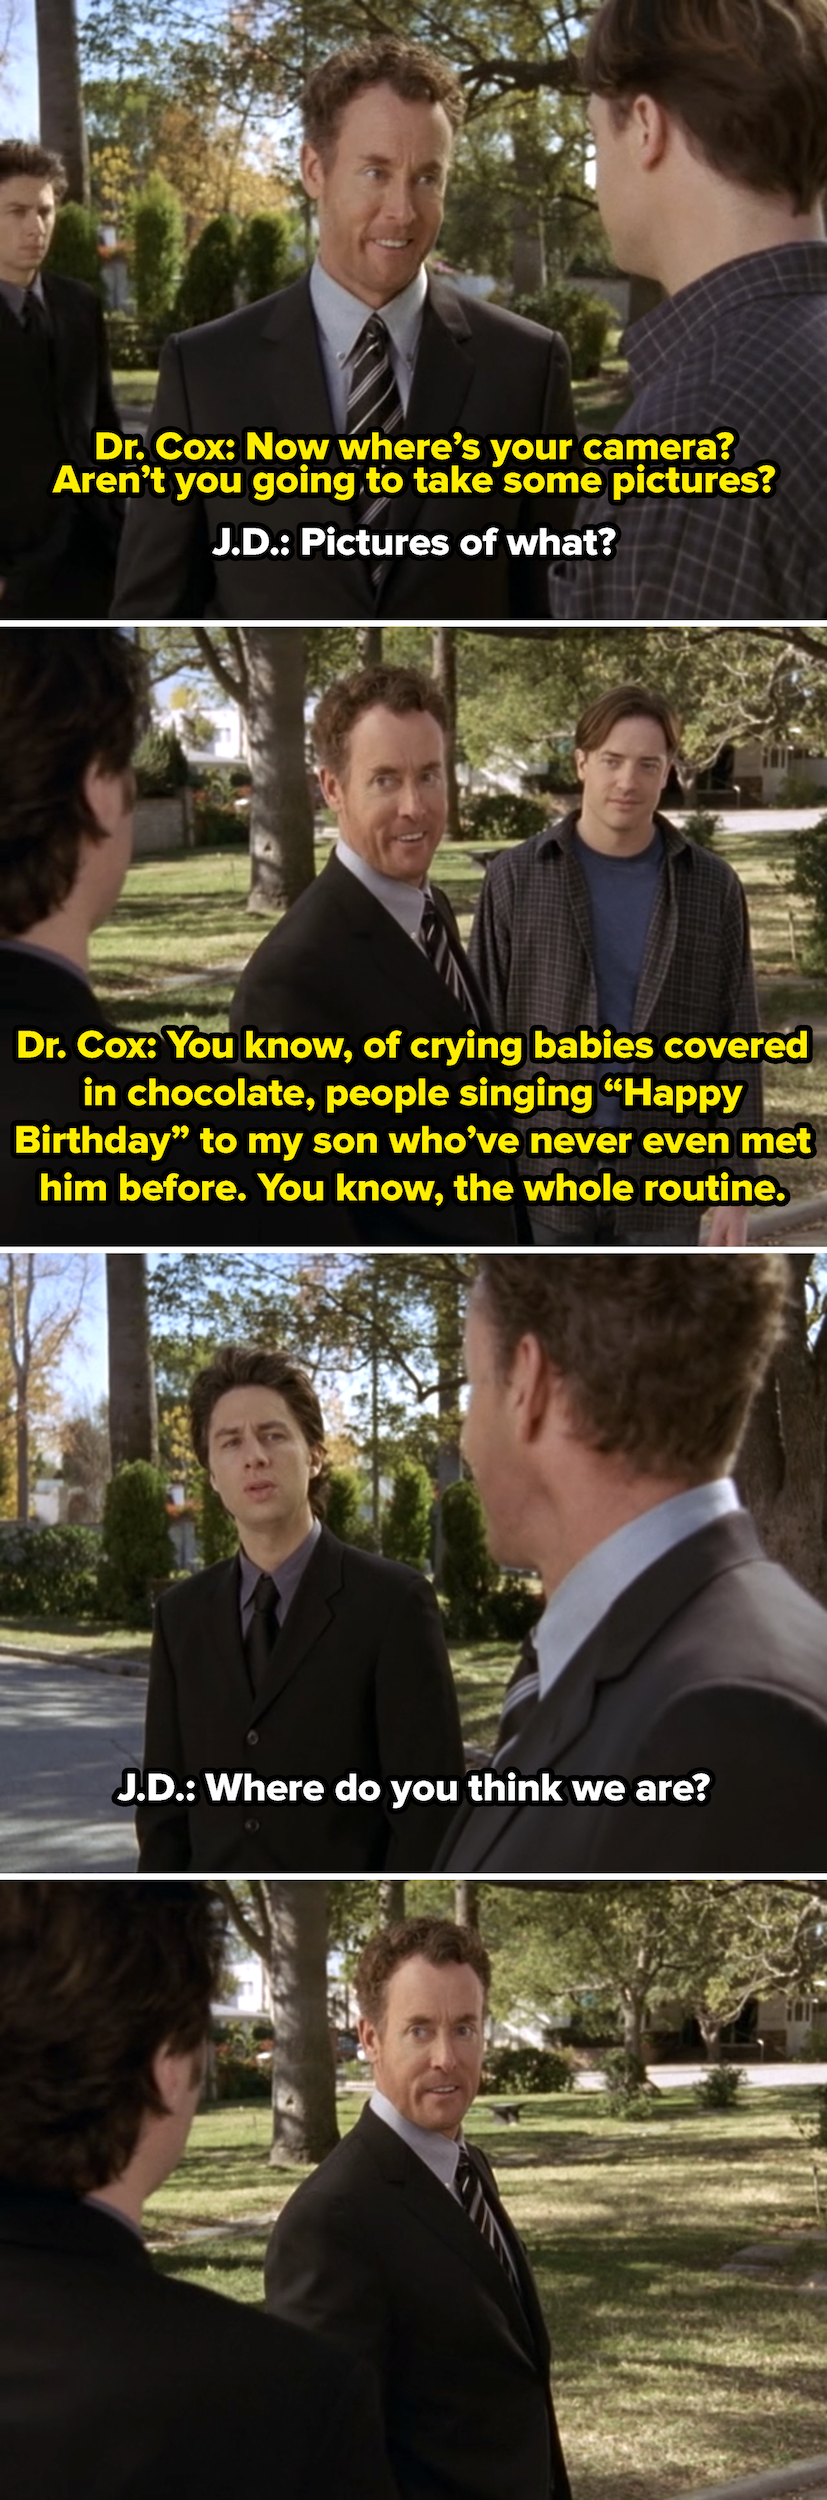 Doctor Cox joking about his son&#x27;s birthday, and JD asking, &quot;Where do you think we are?&quot;